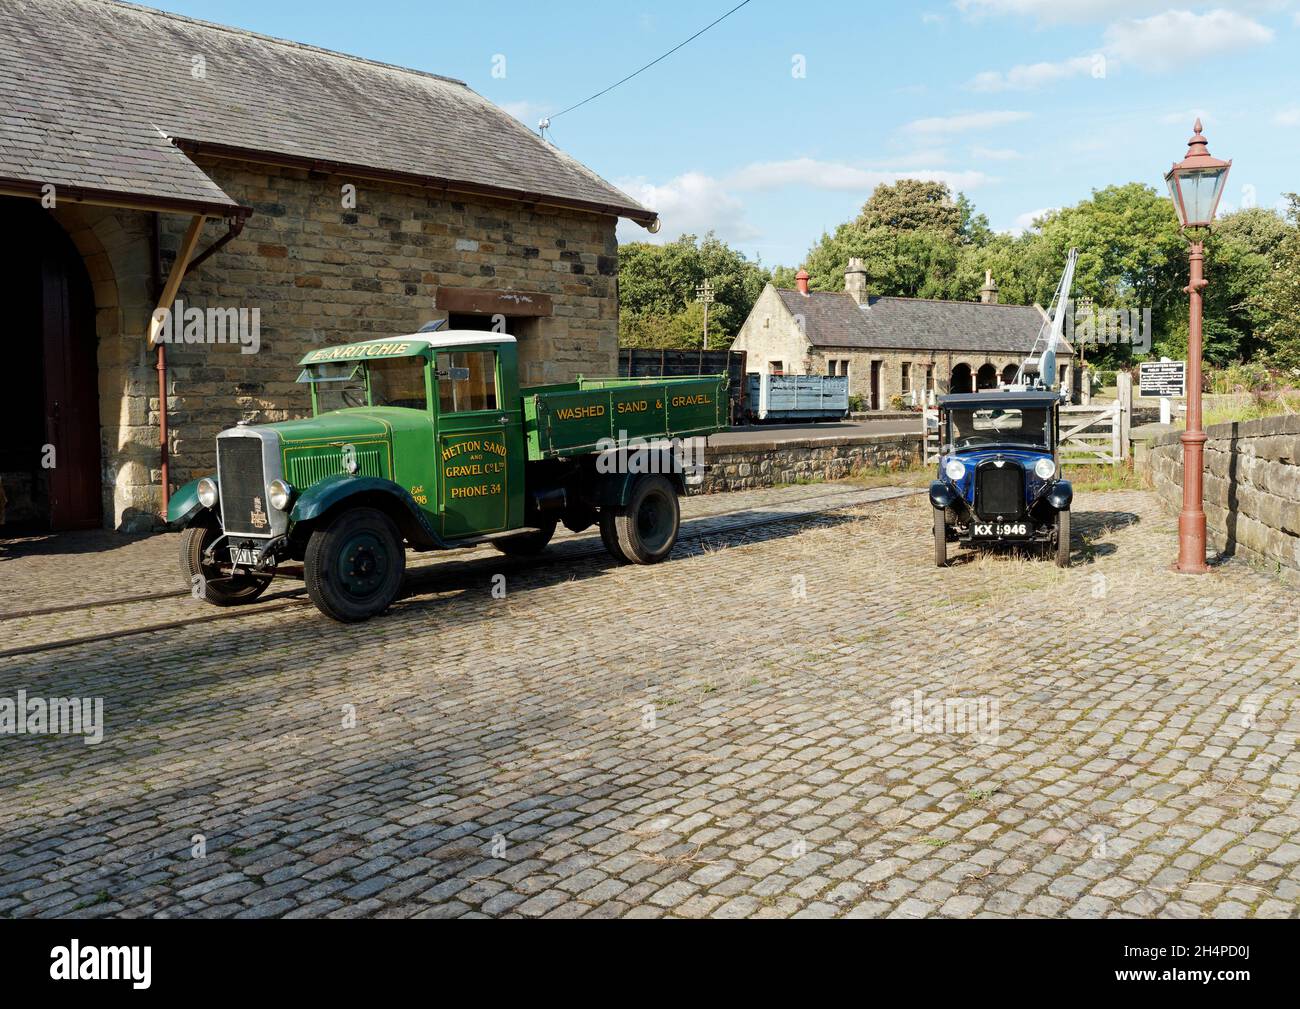 1930's vehicles recreate a scene from the past in the goods yard of Rowley Station, a rebuilt branch l;ine station  at Beamish Museum. Stock Photo